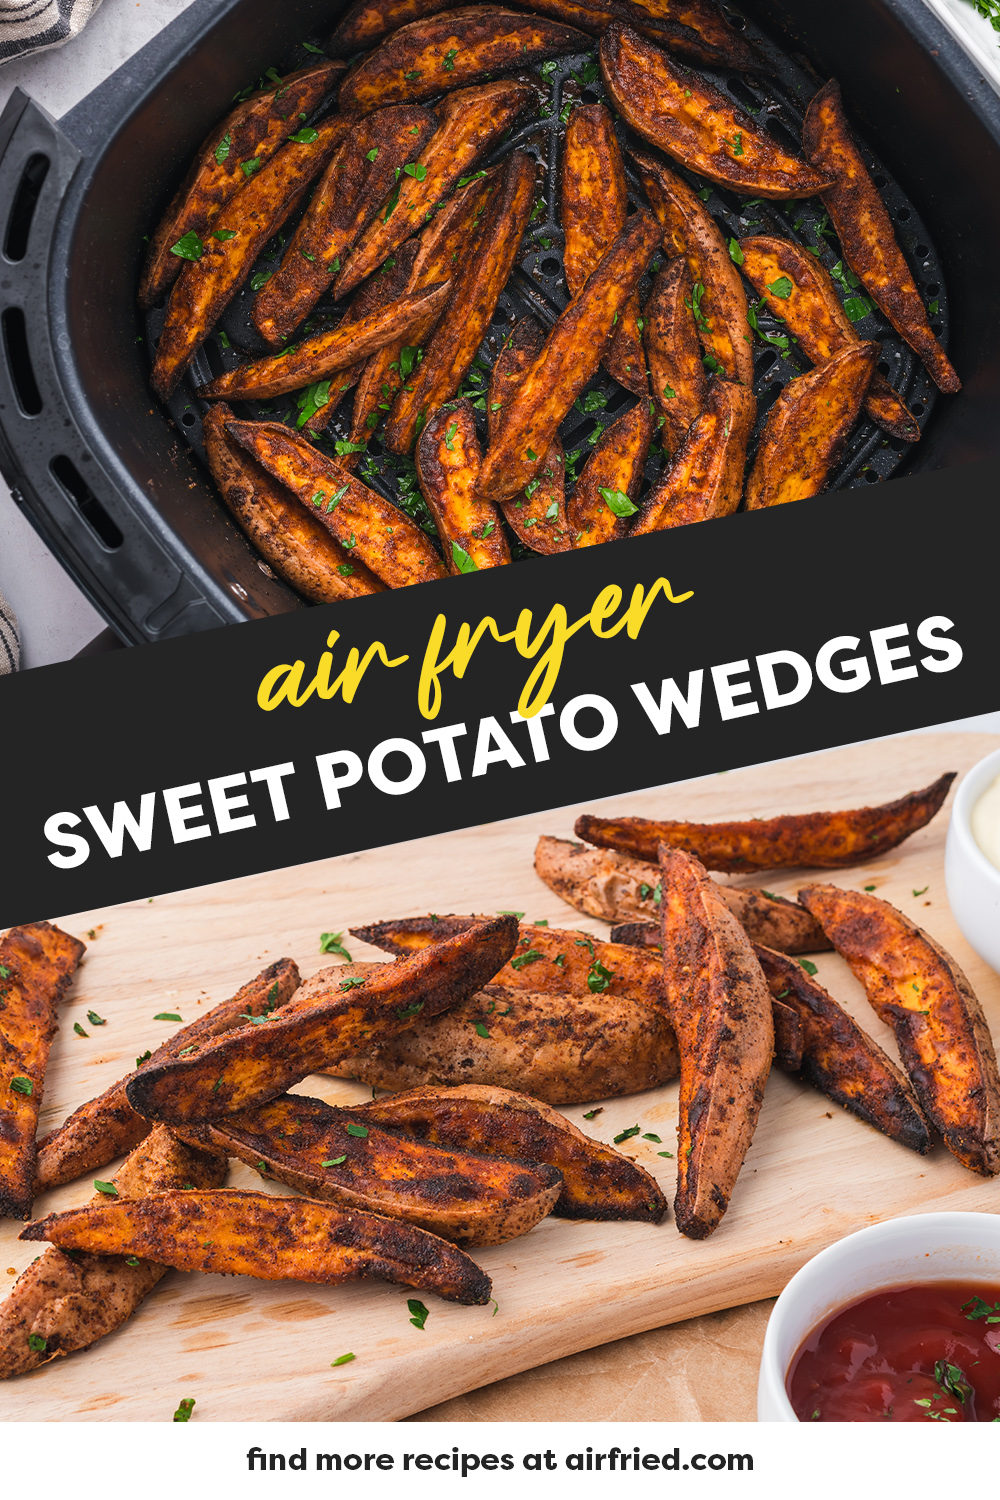 These amazing sweet potato wedges are air fried to a crisp finish while keeping the center warm and soft!